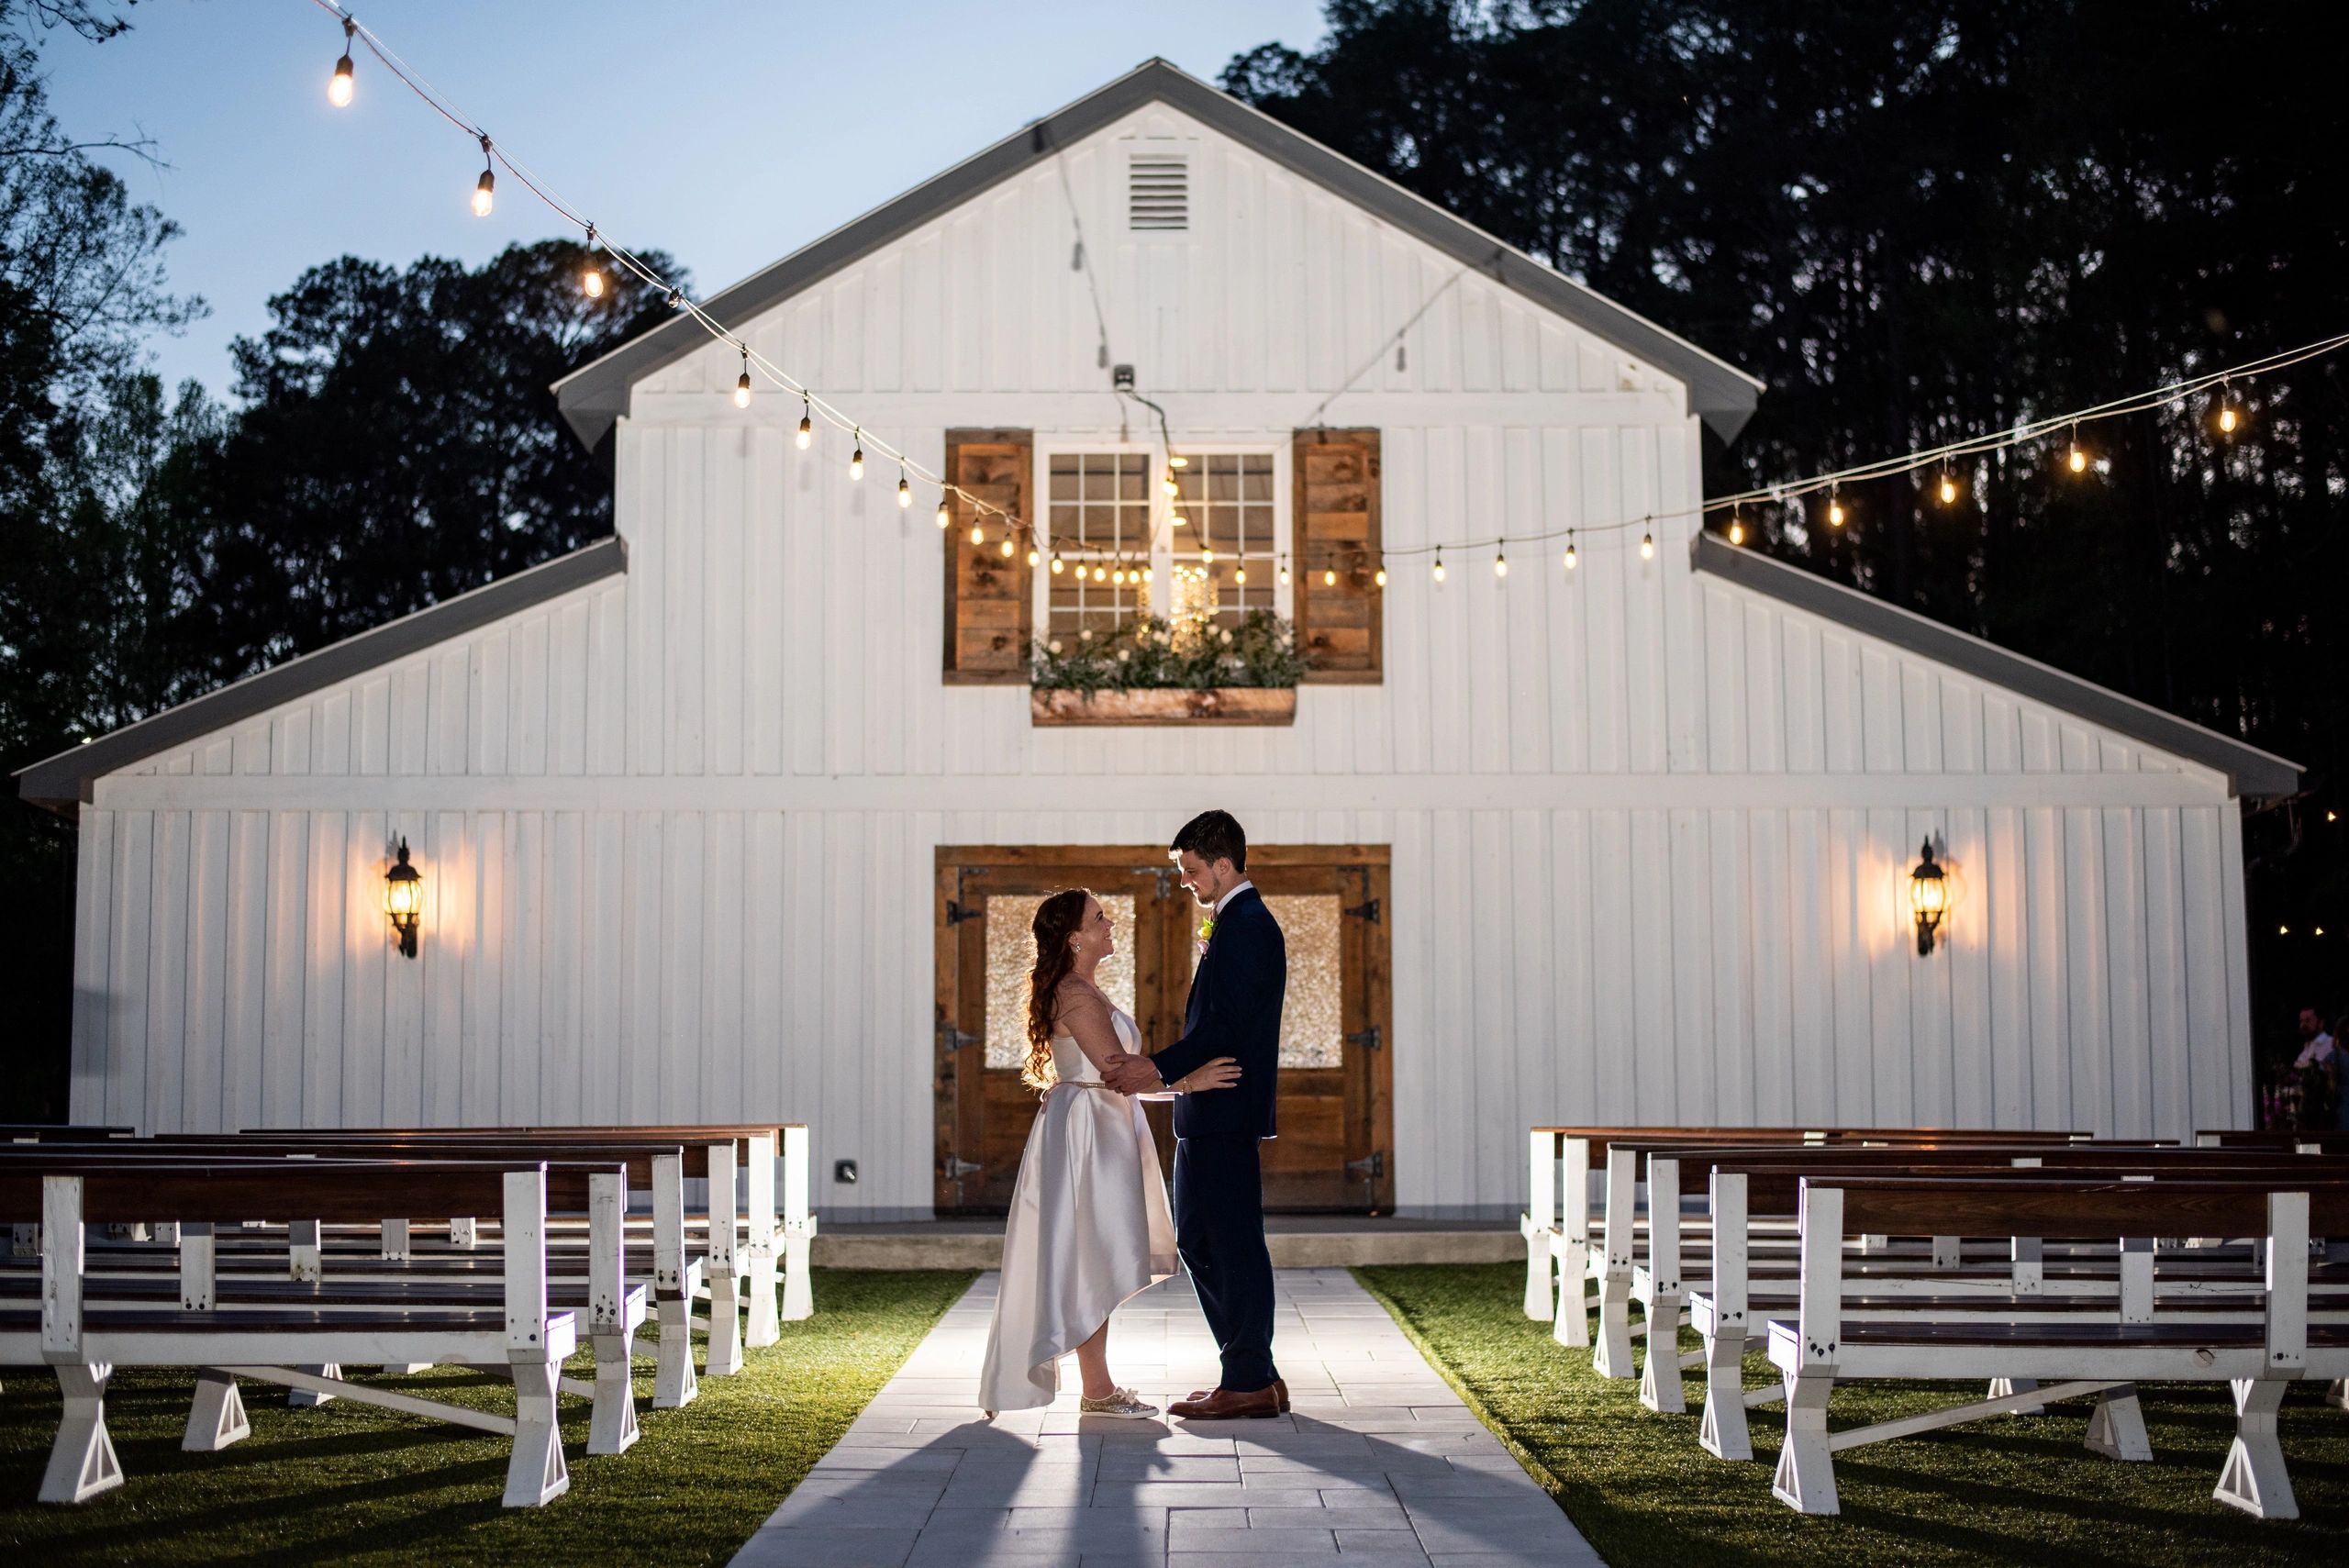 Bride and groom standing in front of a white barn at night